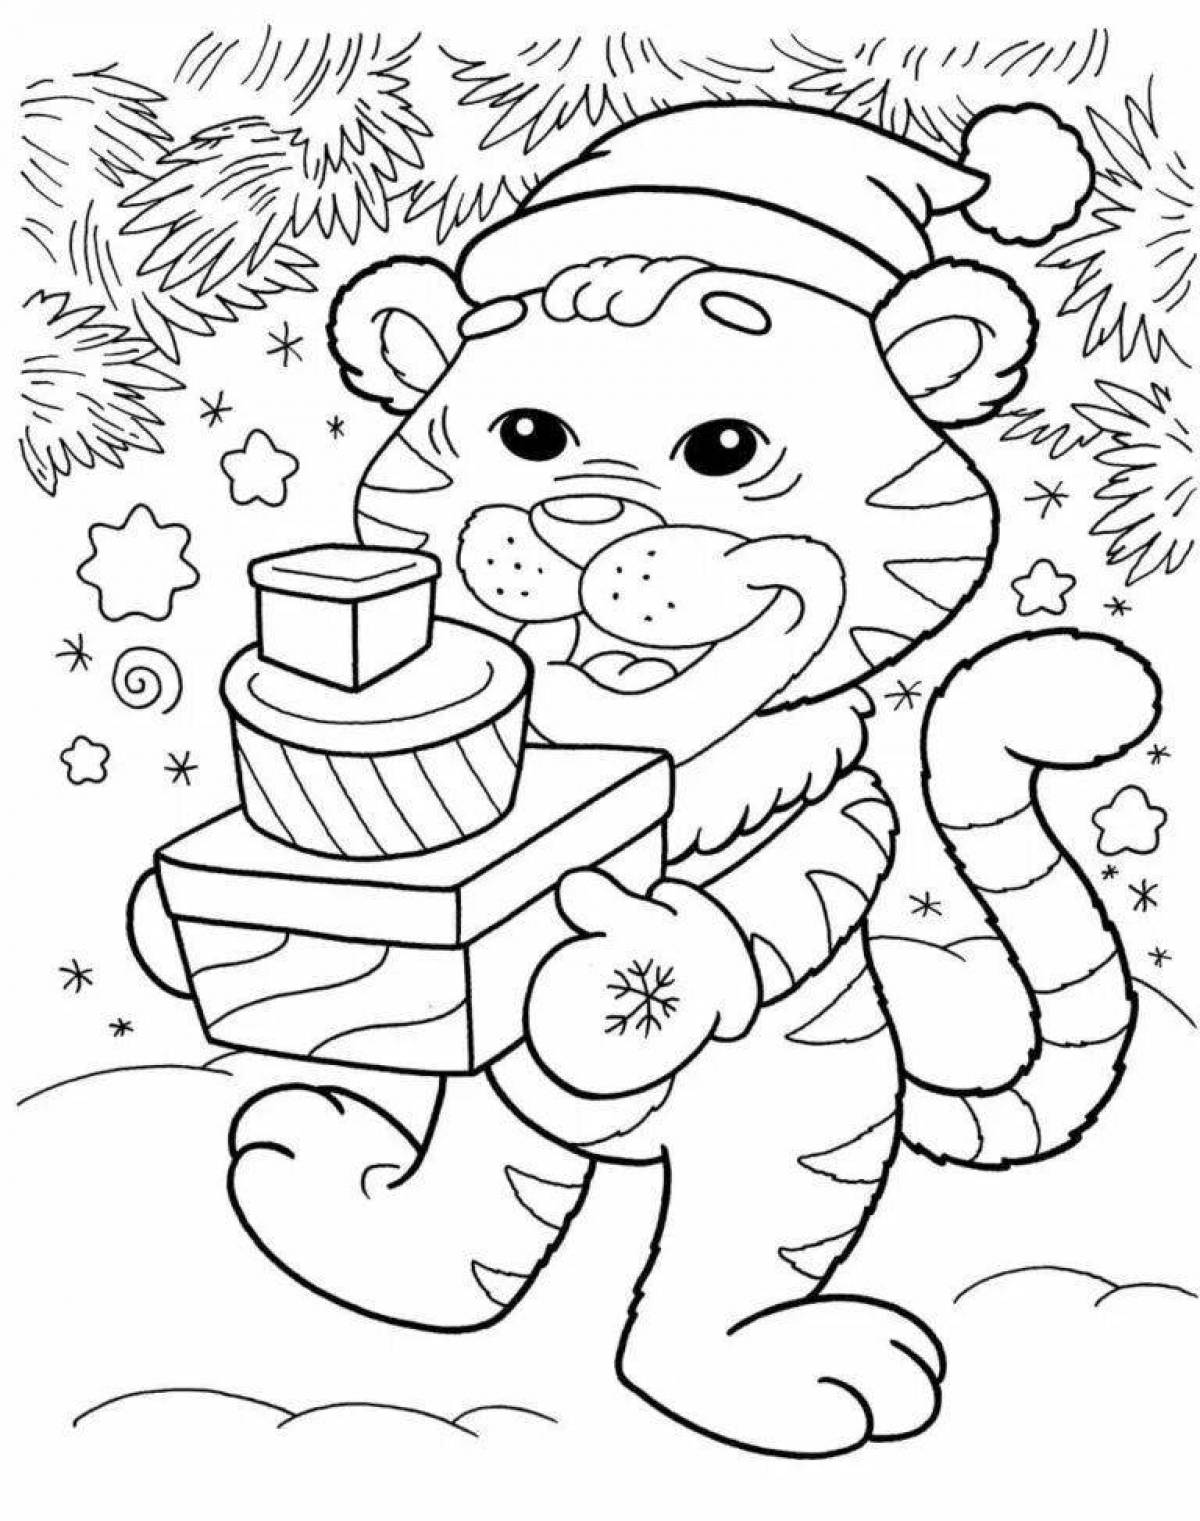 Coloring page holiday symbol of the year